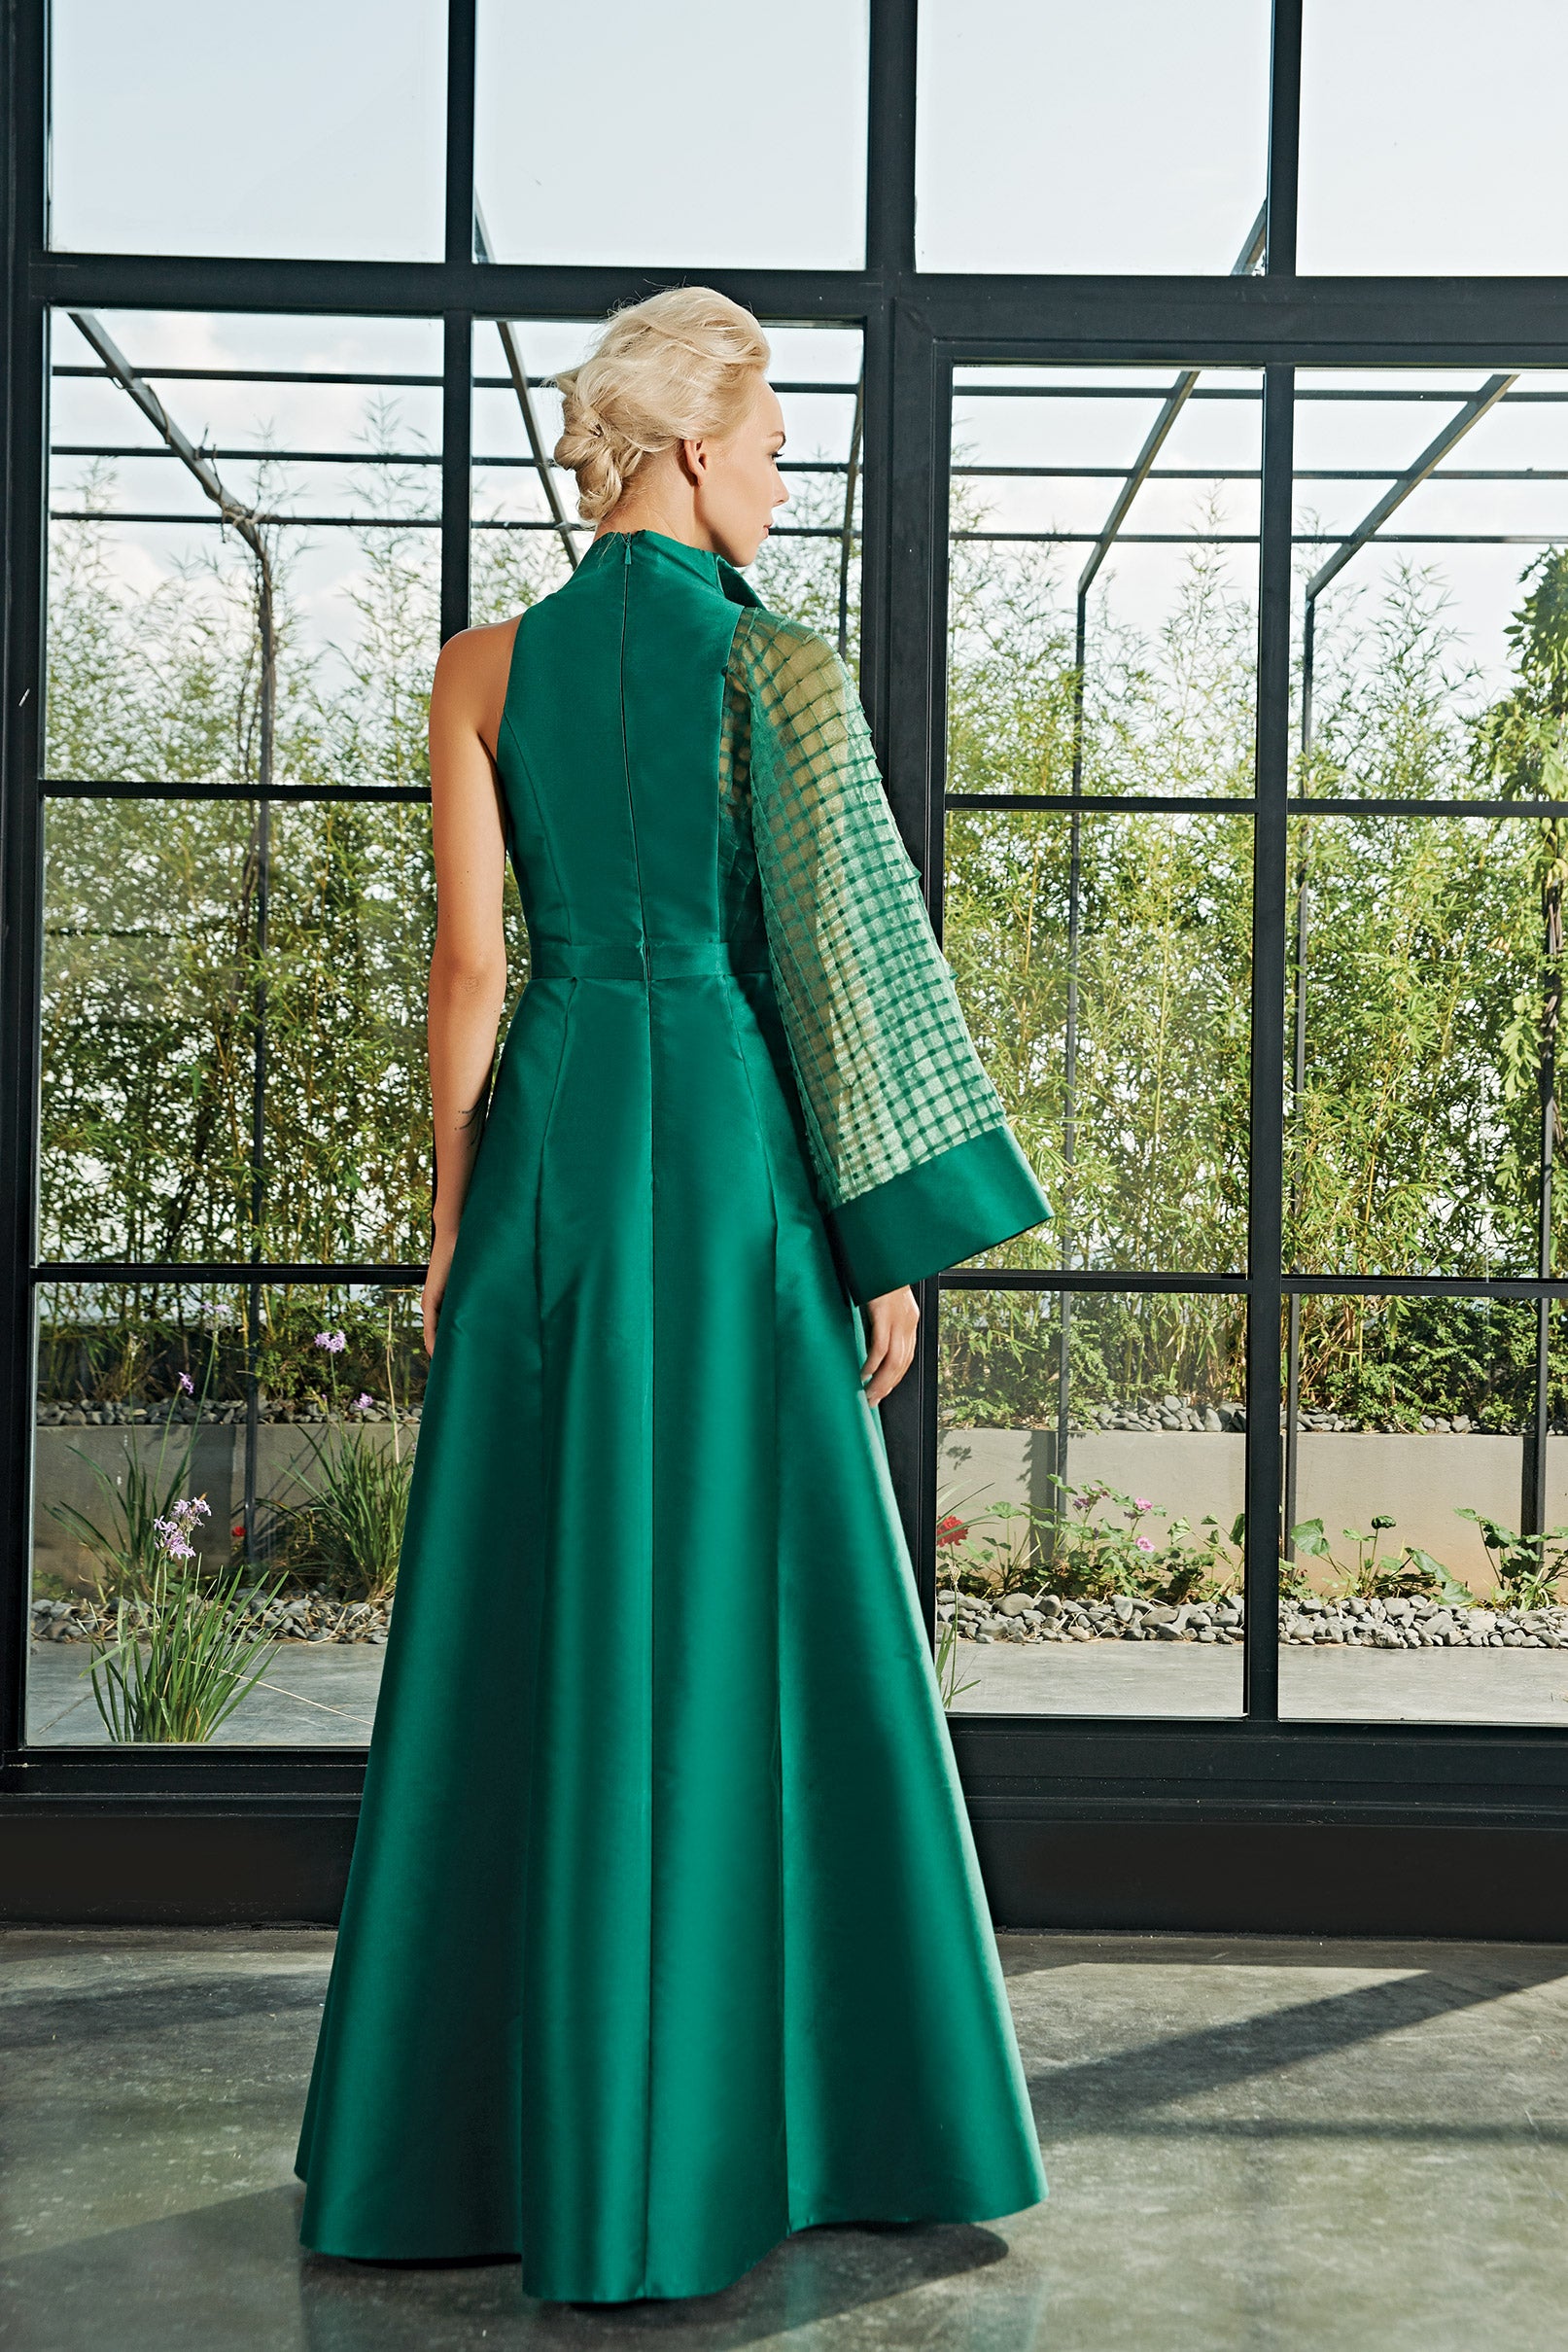 The Trunk Bag Maxi in Green